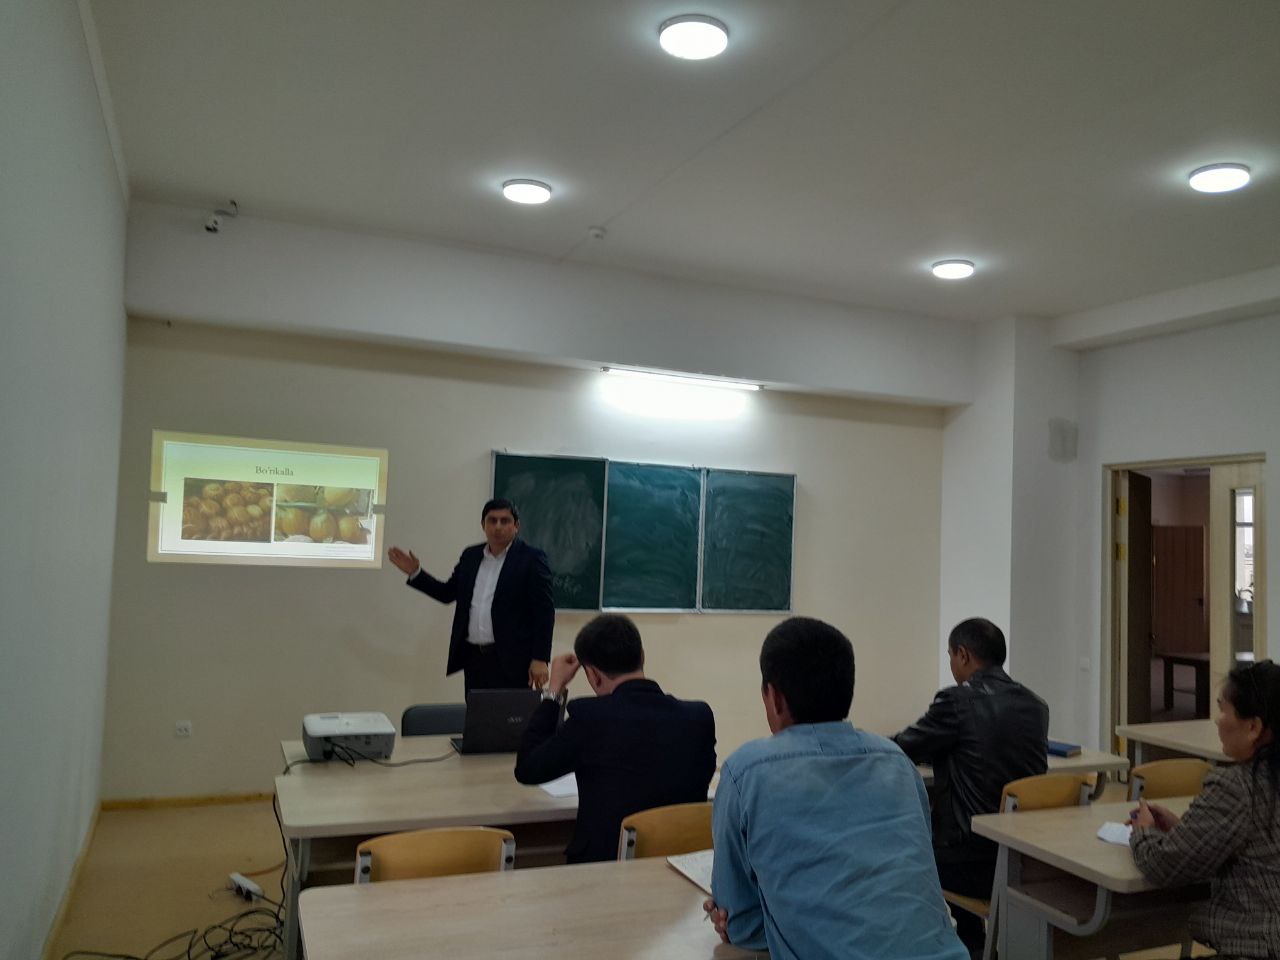 Scientific-methodological seminar on the topic of melons of Uzbekistan and their varieties by Sadullayev Sanjar, head of the Department of Fruit and V